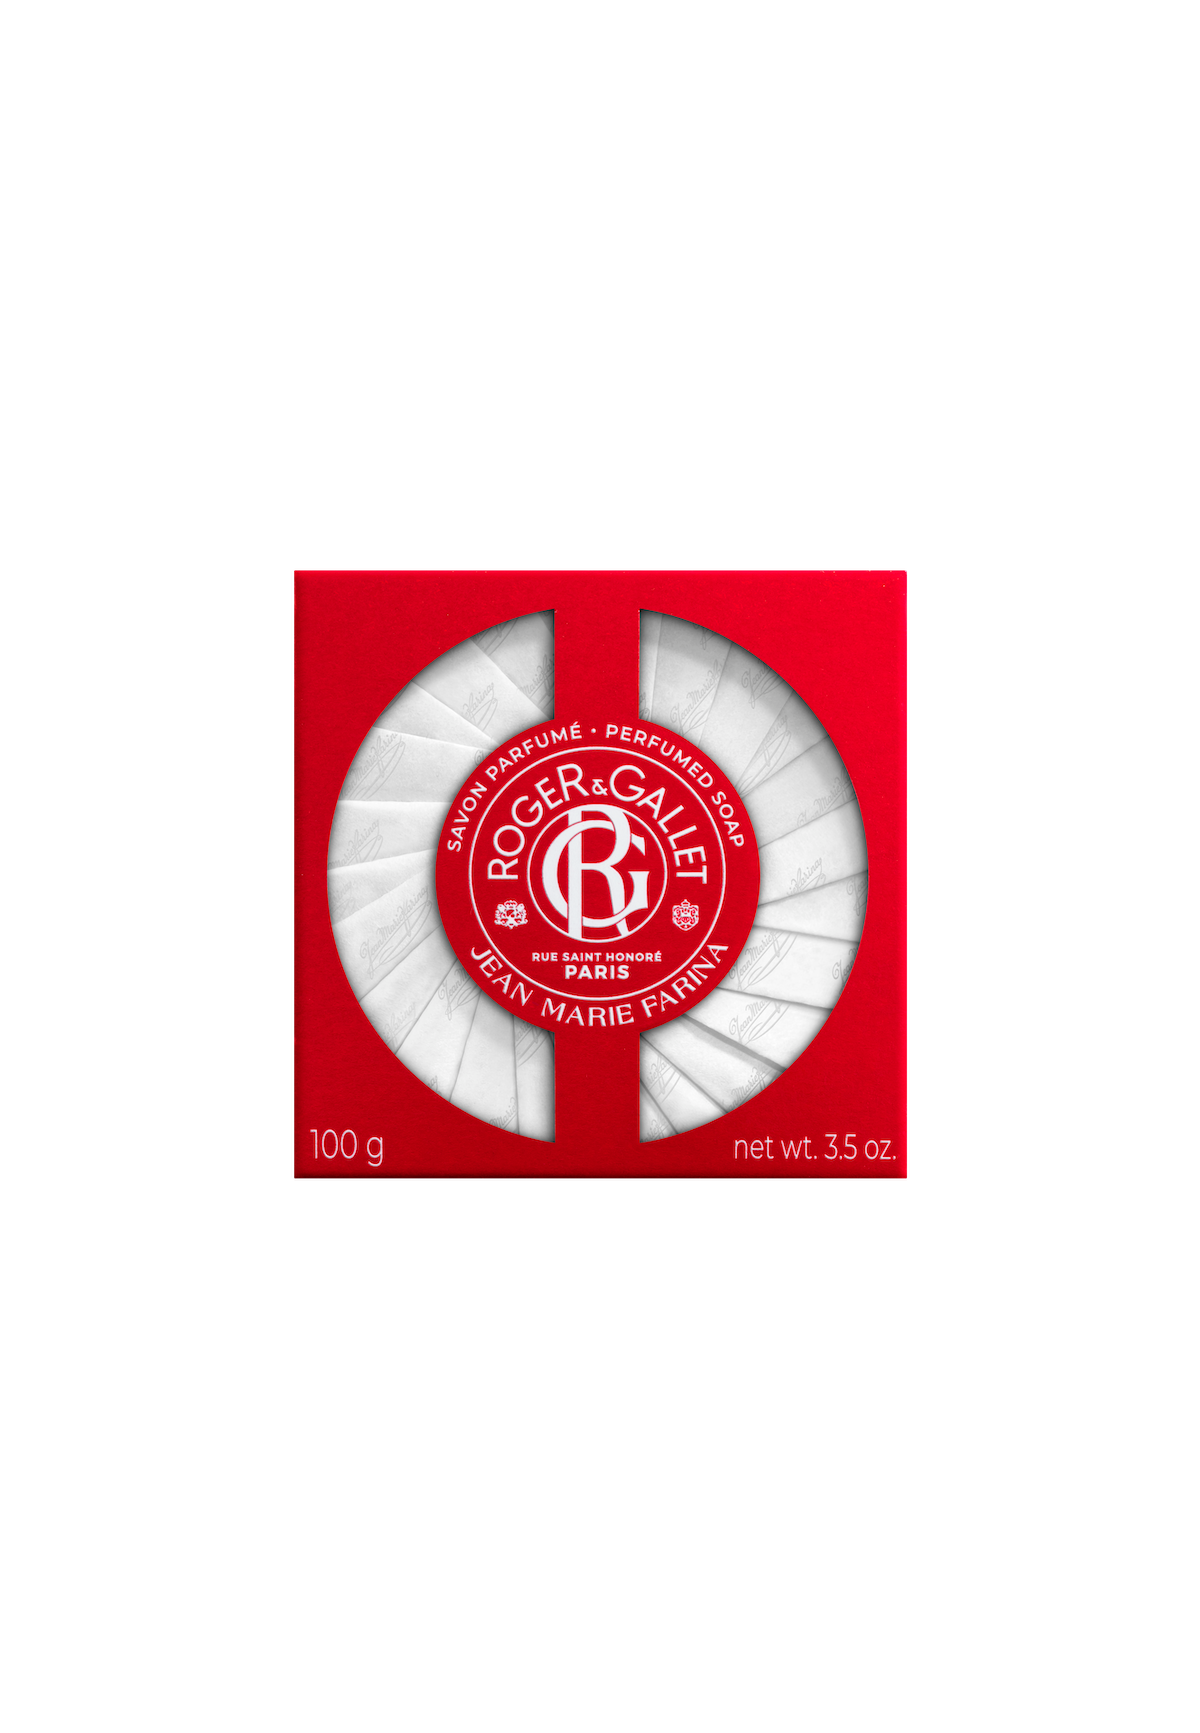 A Roger & Gallet Jean Marie Farina perfumed soap in white and red packaging, displayed against a black background. The soap is circular, segmented.